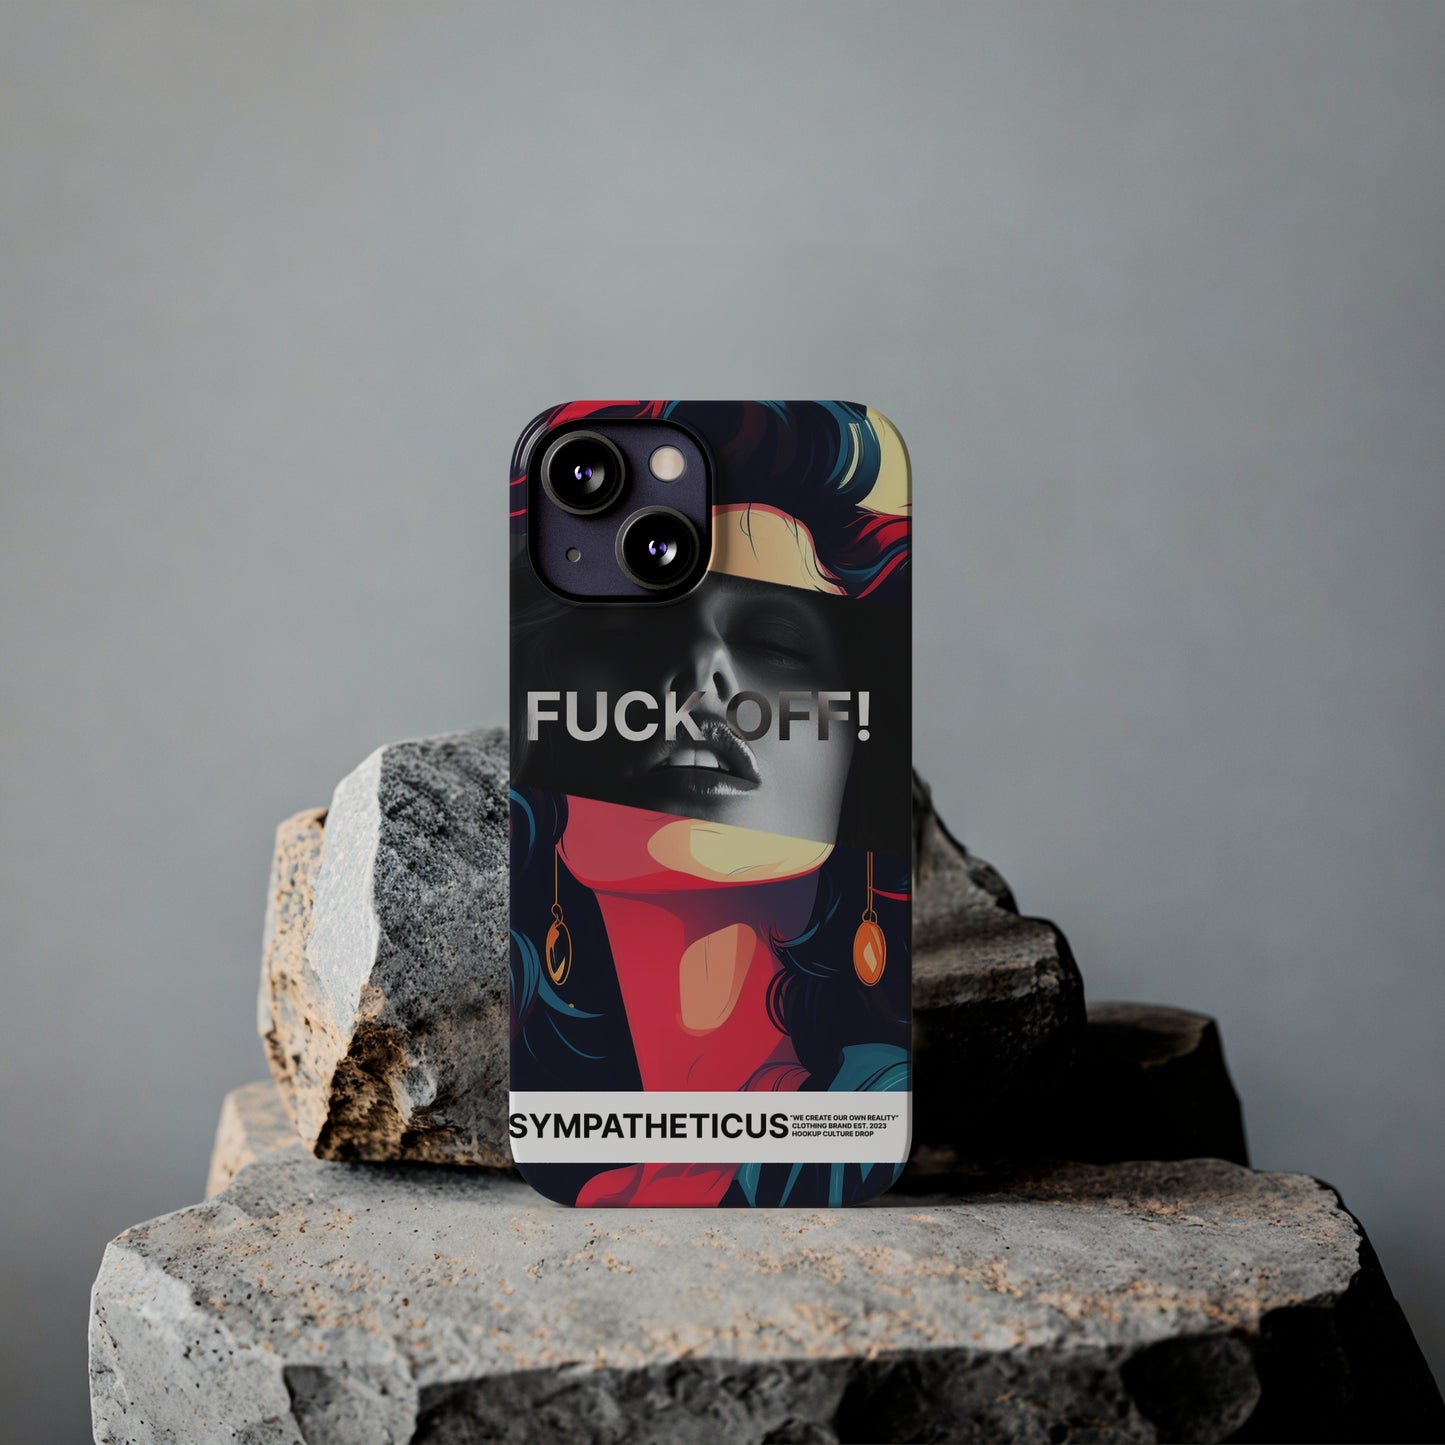 Hookup culture special iphone case-02